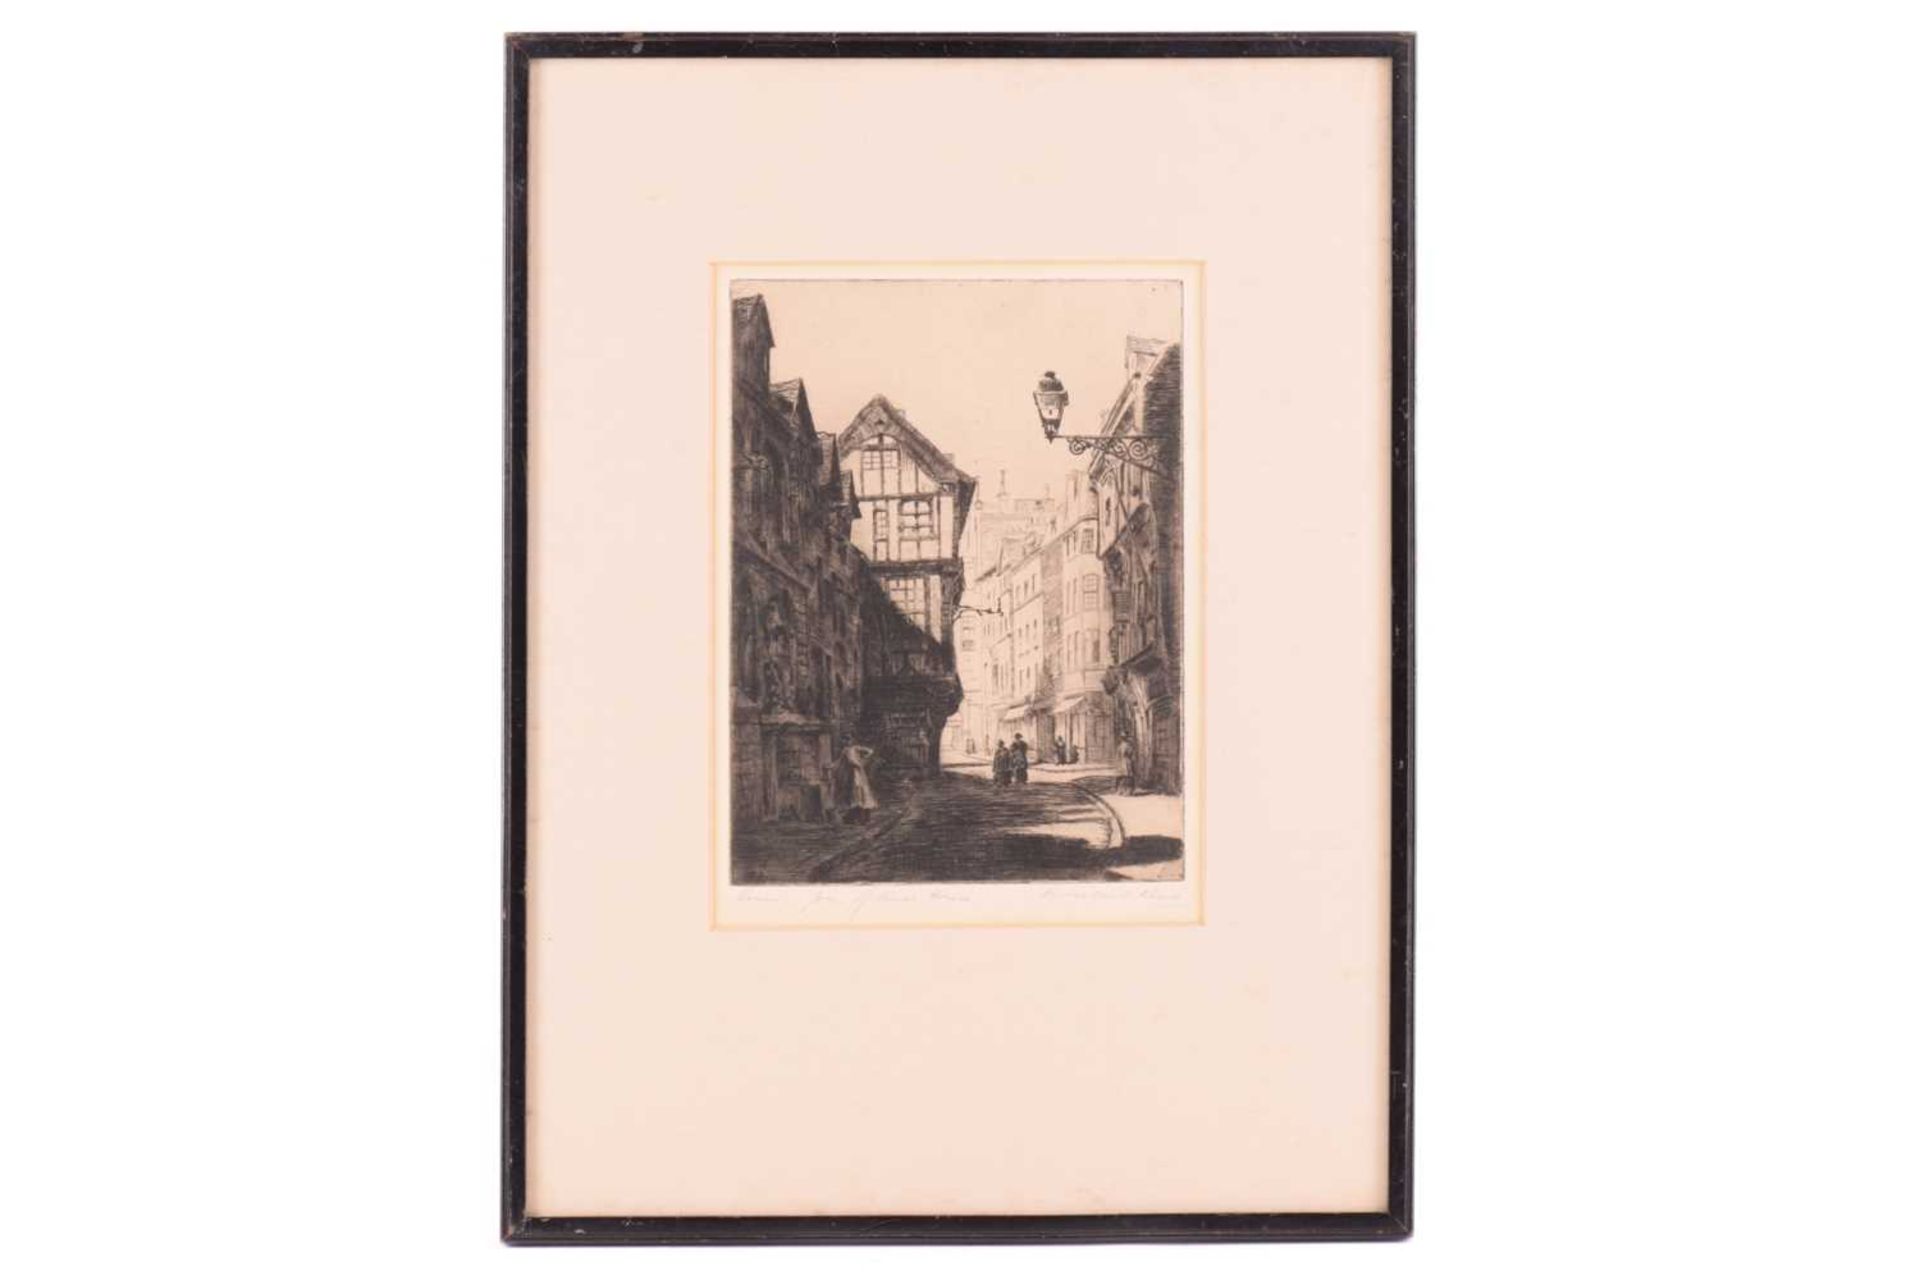 Russell Sidney Reeve (1895-1970), 'Joan of Arc's House', etching, pencil signed and titled, 21 cm